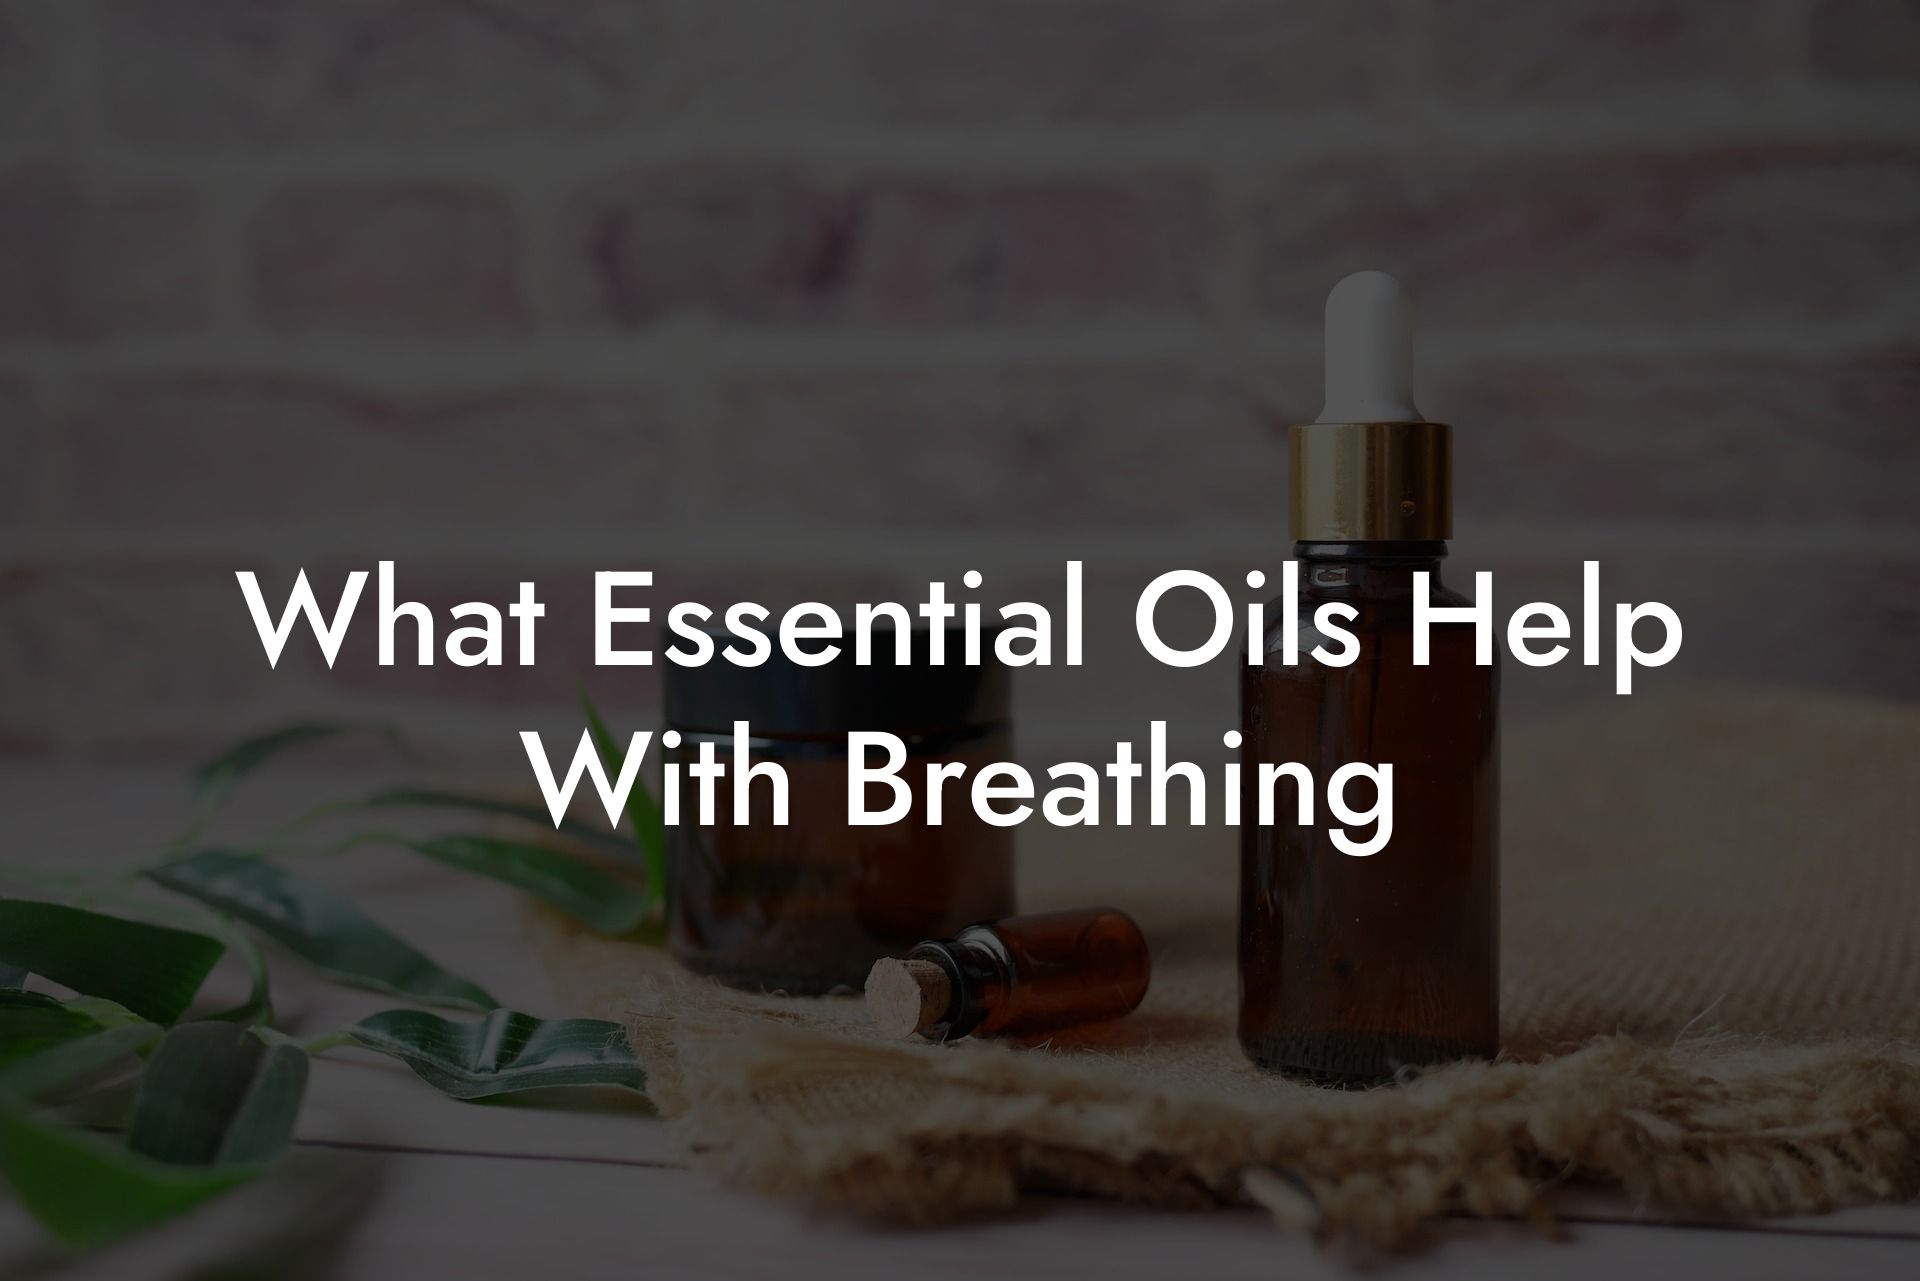 What Essential Oils Help With Breathing